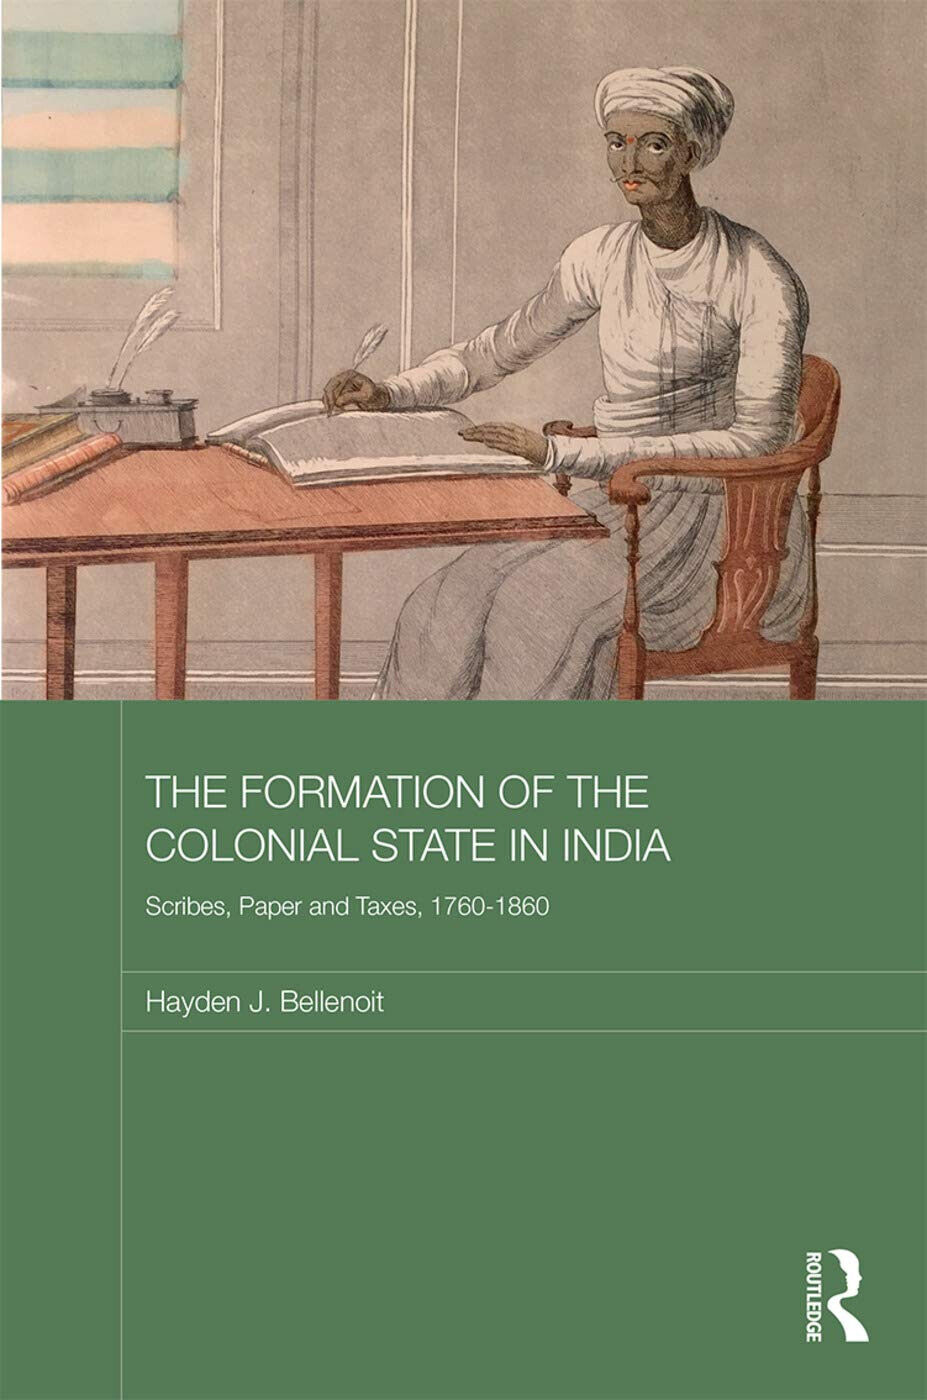 The Formation of the Colonial State in India - Hayden J. A. Bellenoit - 2017 libro usato